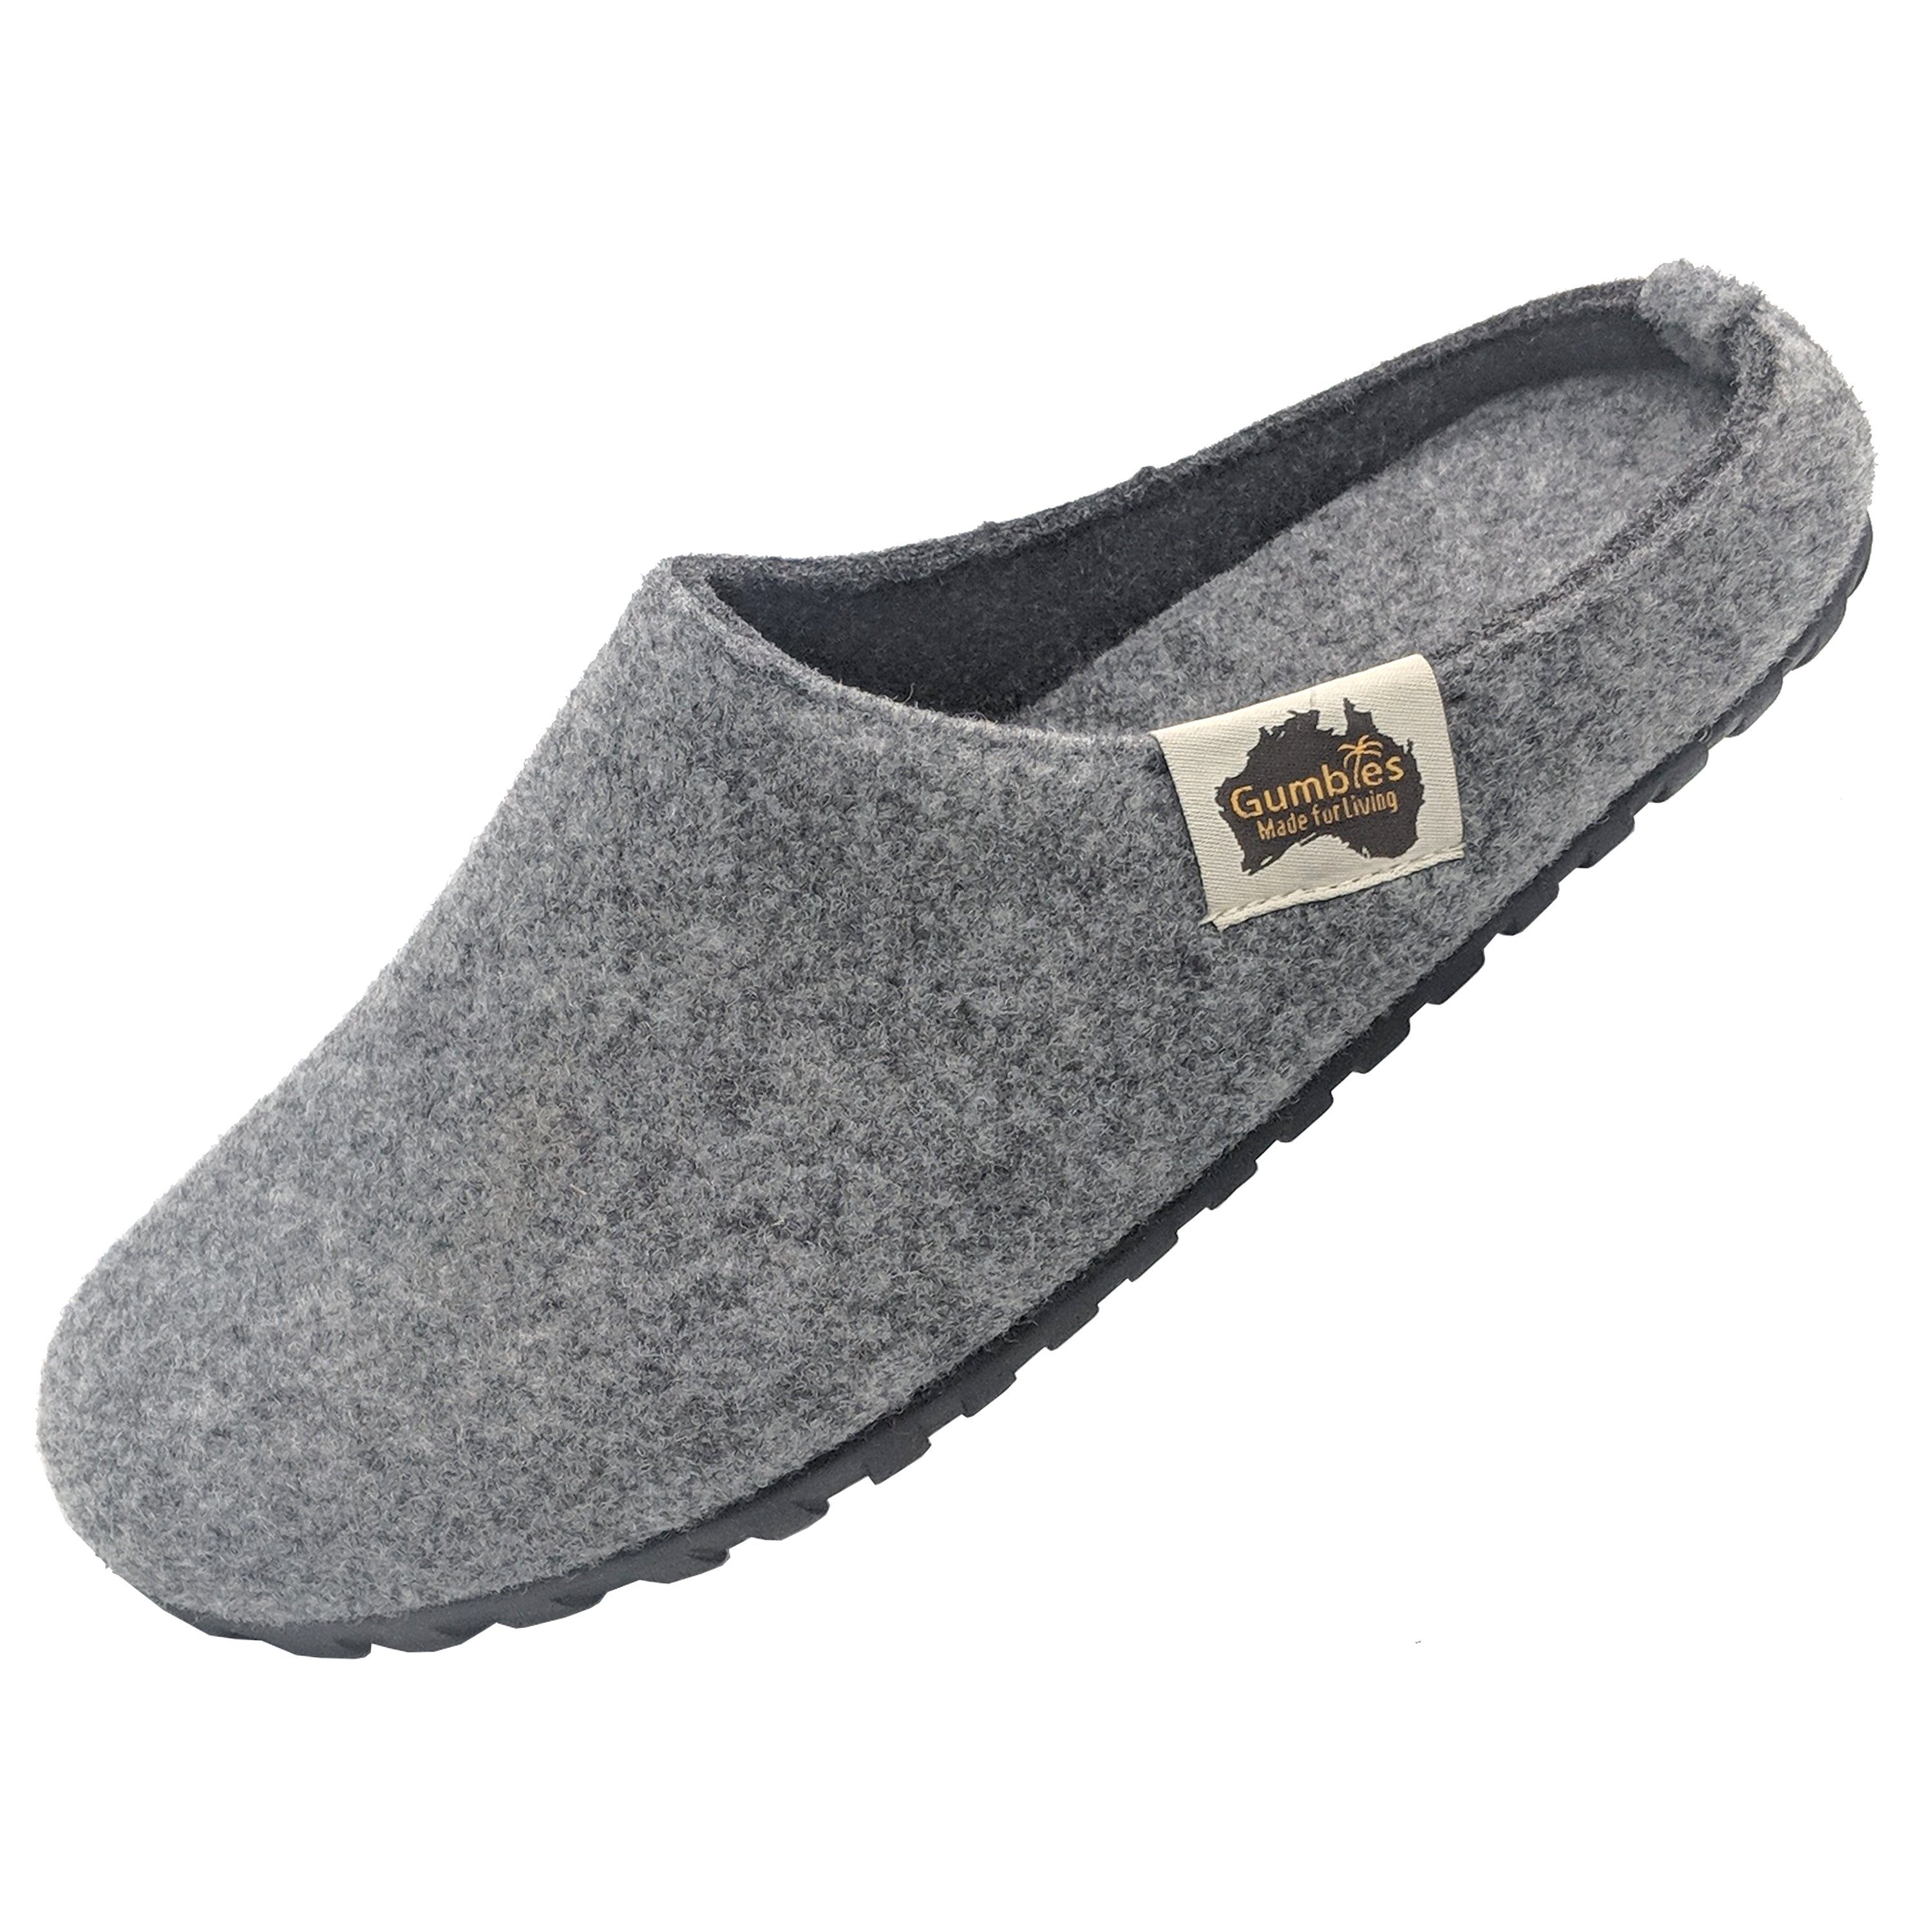 Gumbies Outback Slipper in Charcoal recycelten Materialien Designs« Hausschuh »in farbenfrohen aus Grey